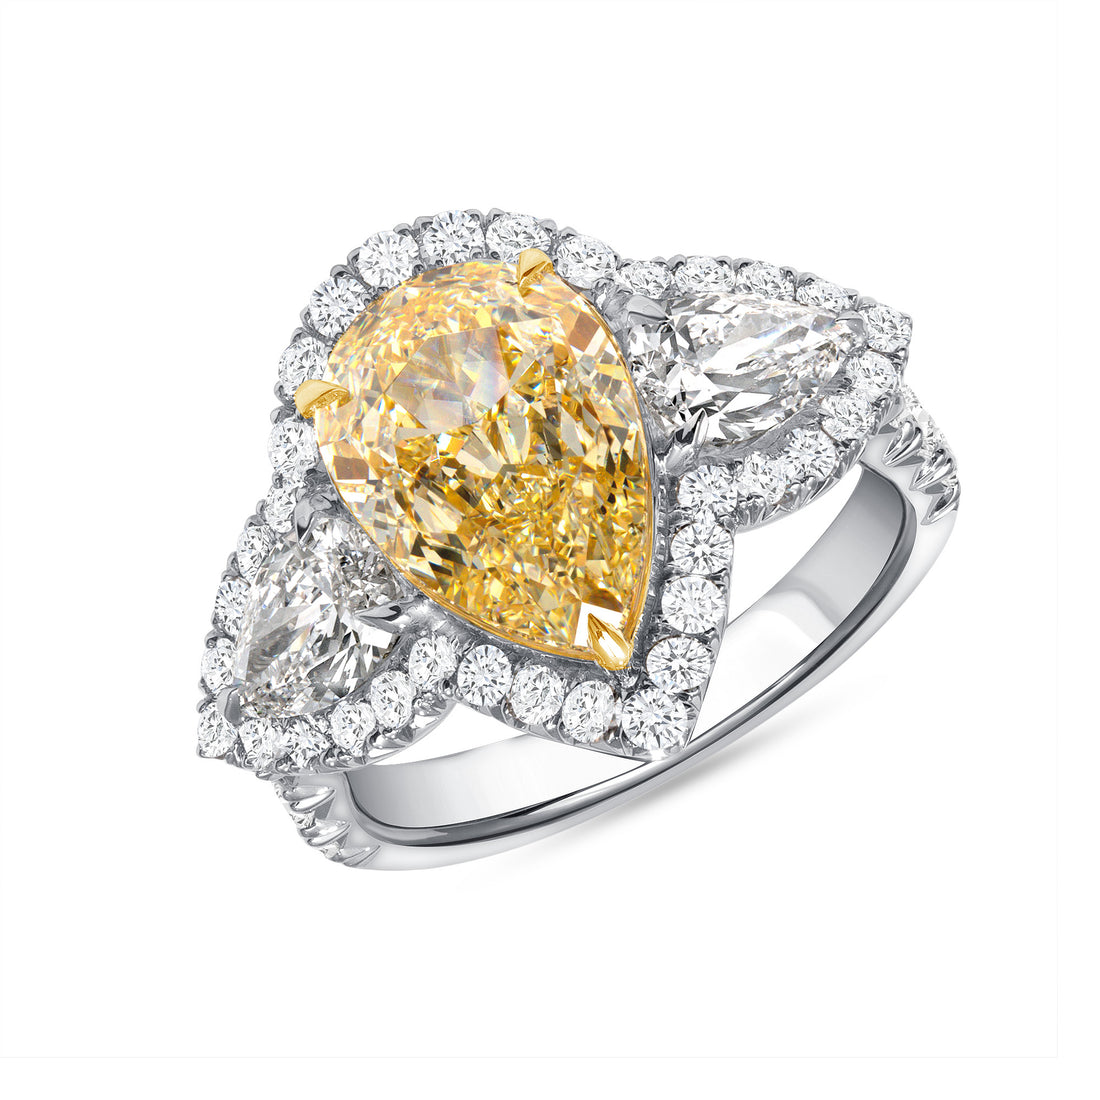 5.69 CT. Pear Yellow Diamond and Pear and Round Brilliant Diamond Ring in 18K Yellow Gold and Platinum